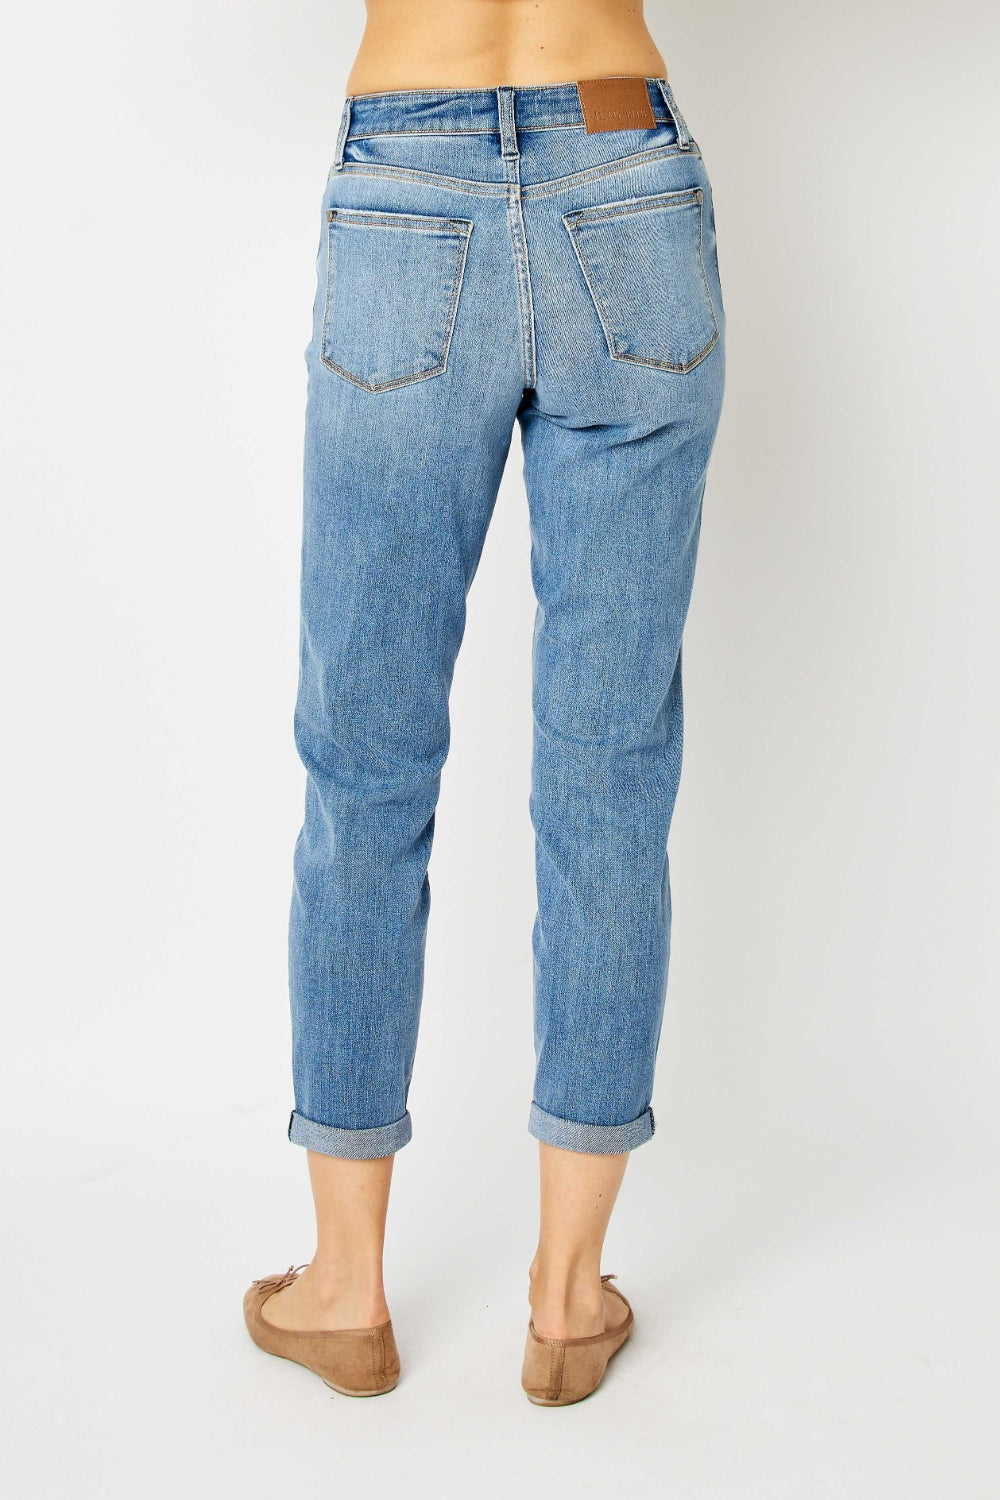 Judy Blue Full Size Cuffed Hem Slim Jeans free shipping -Oh Em Gee Boutique